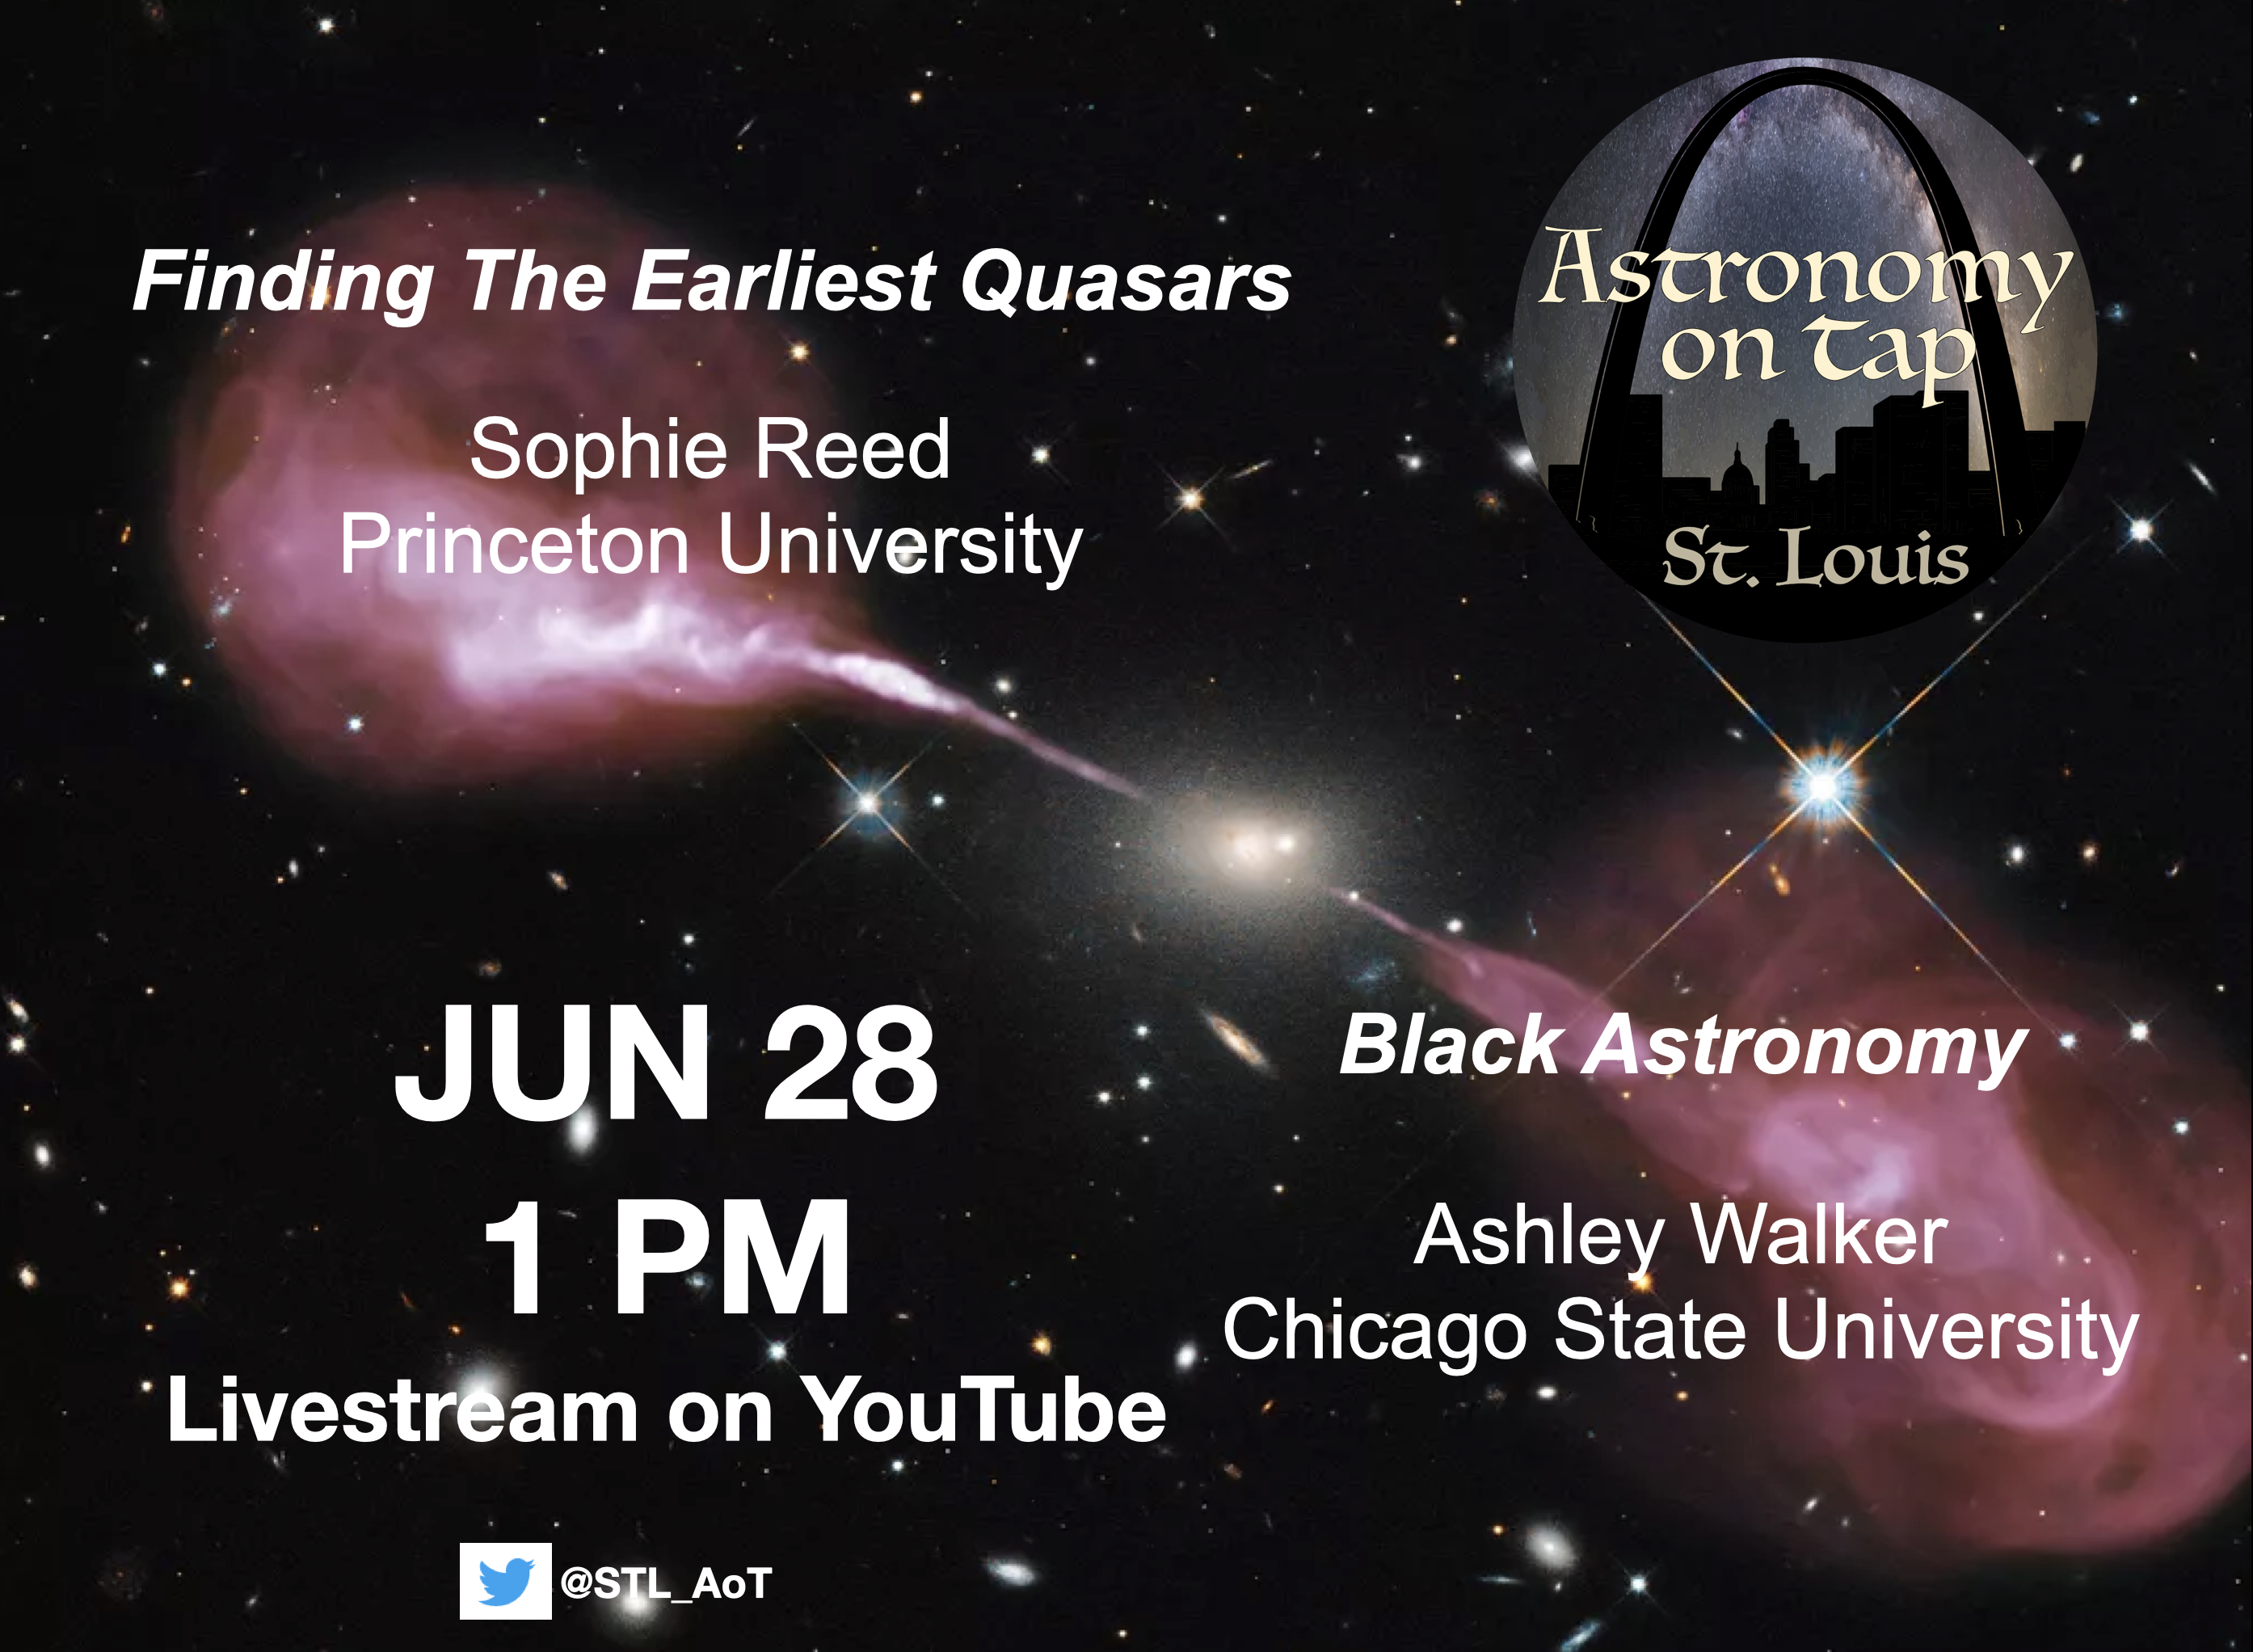 Astronomy on Tap St. Louis: online event, June 28th, 2020 – Astronomy On Tap